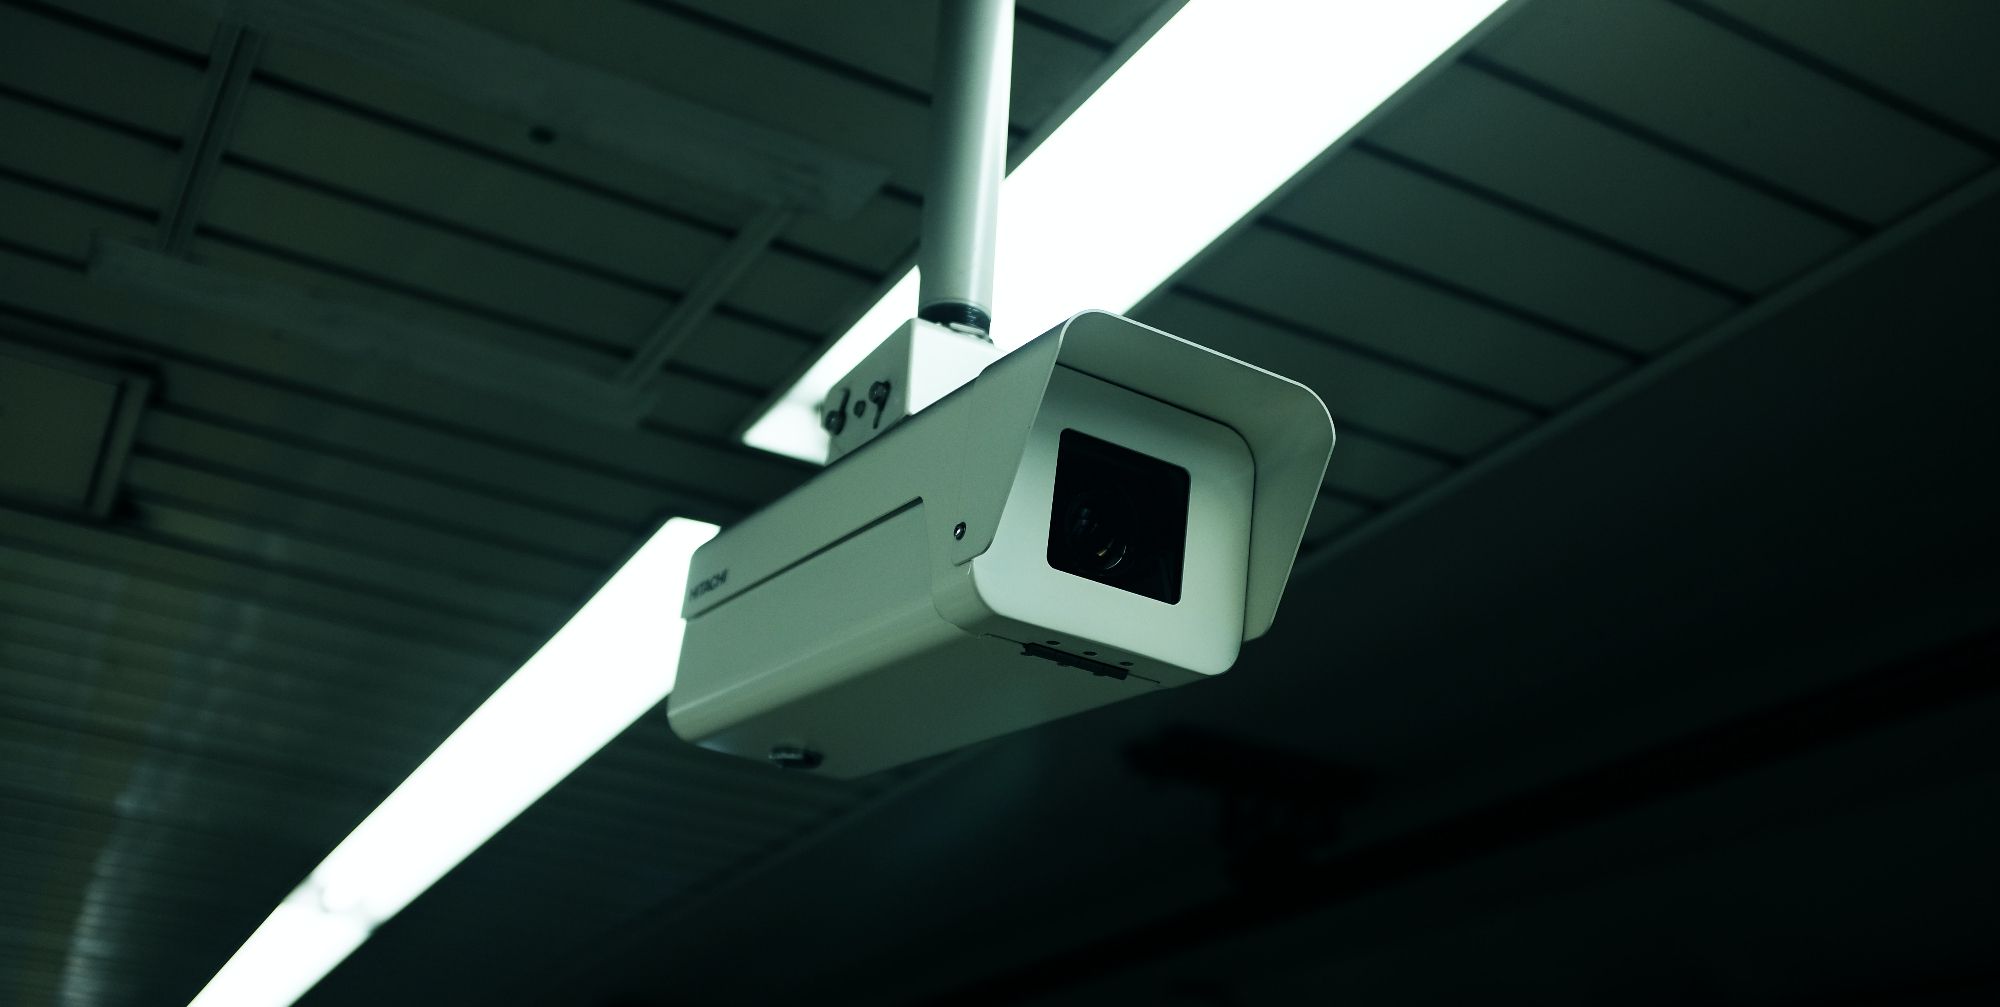 image of cctv camera mounted to ceiling